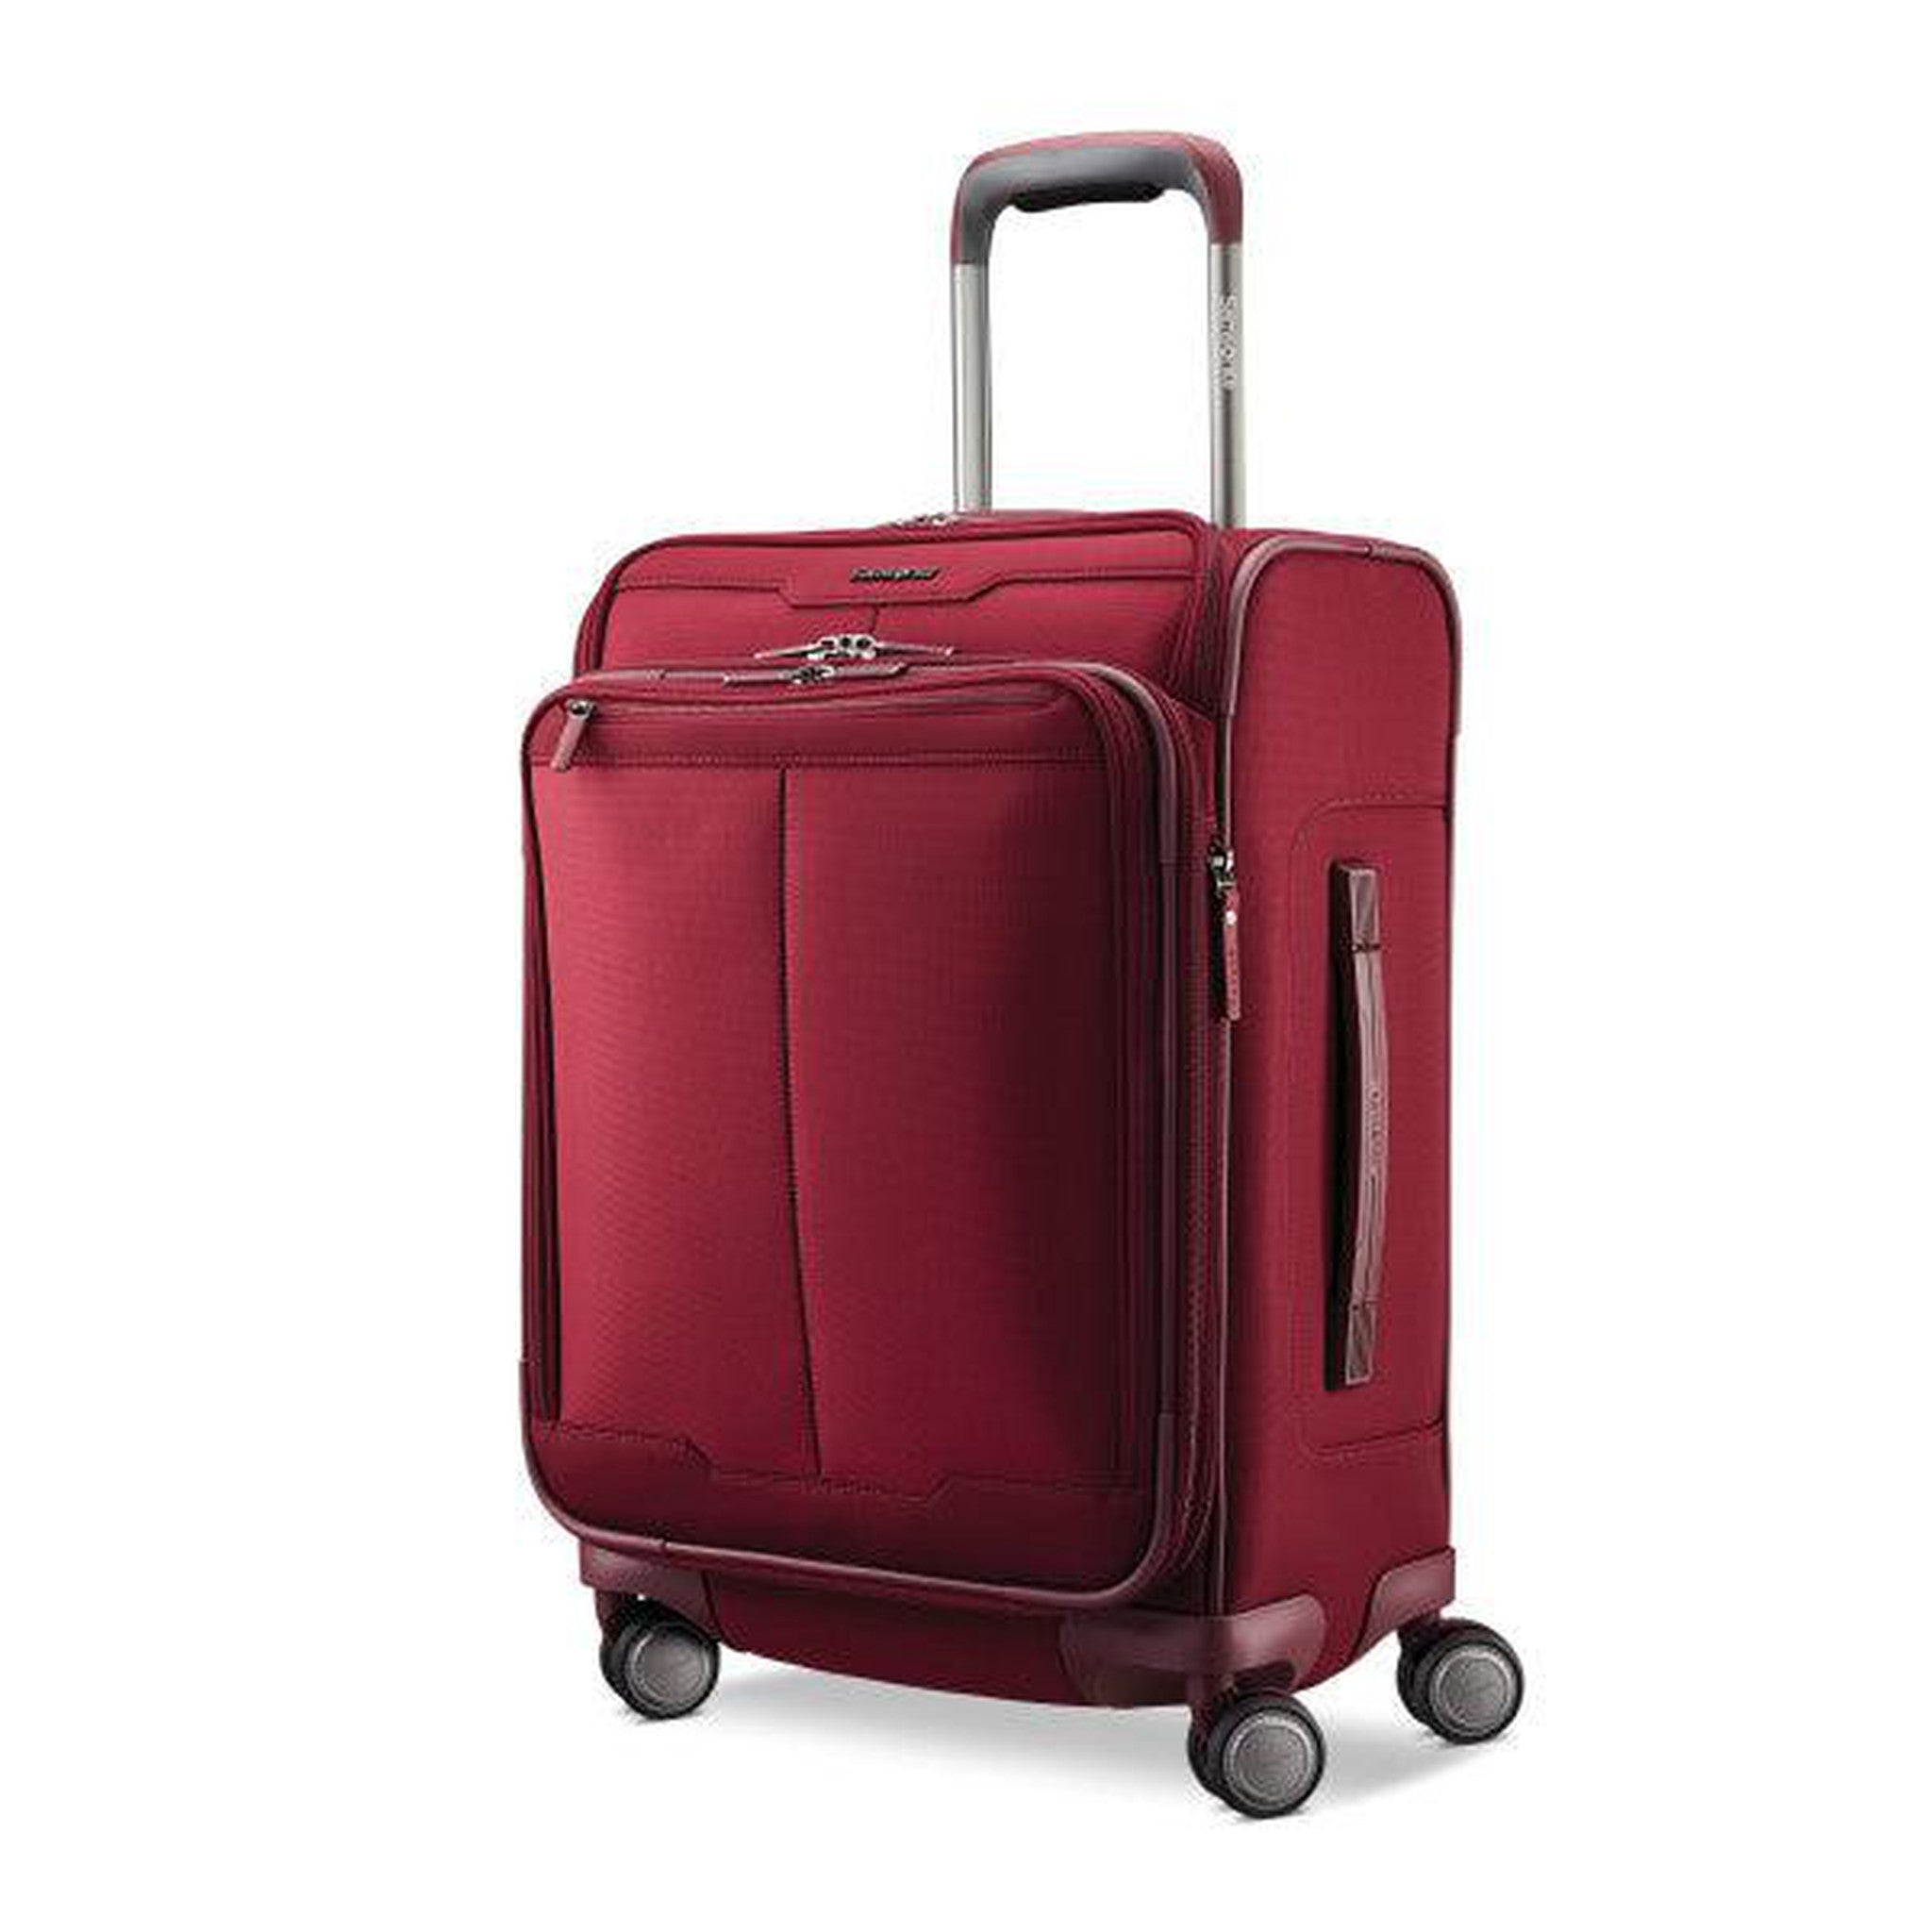 Samsonite Silhouette 17 Softside Carry-On Expandable Spinner – Luggage Pros